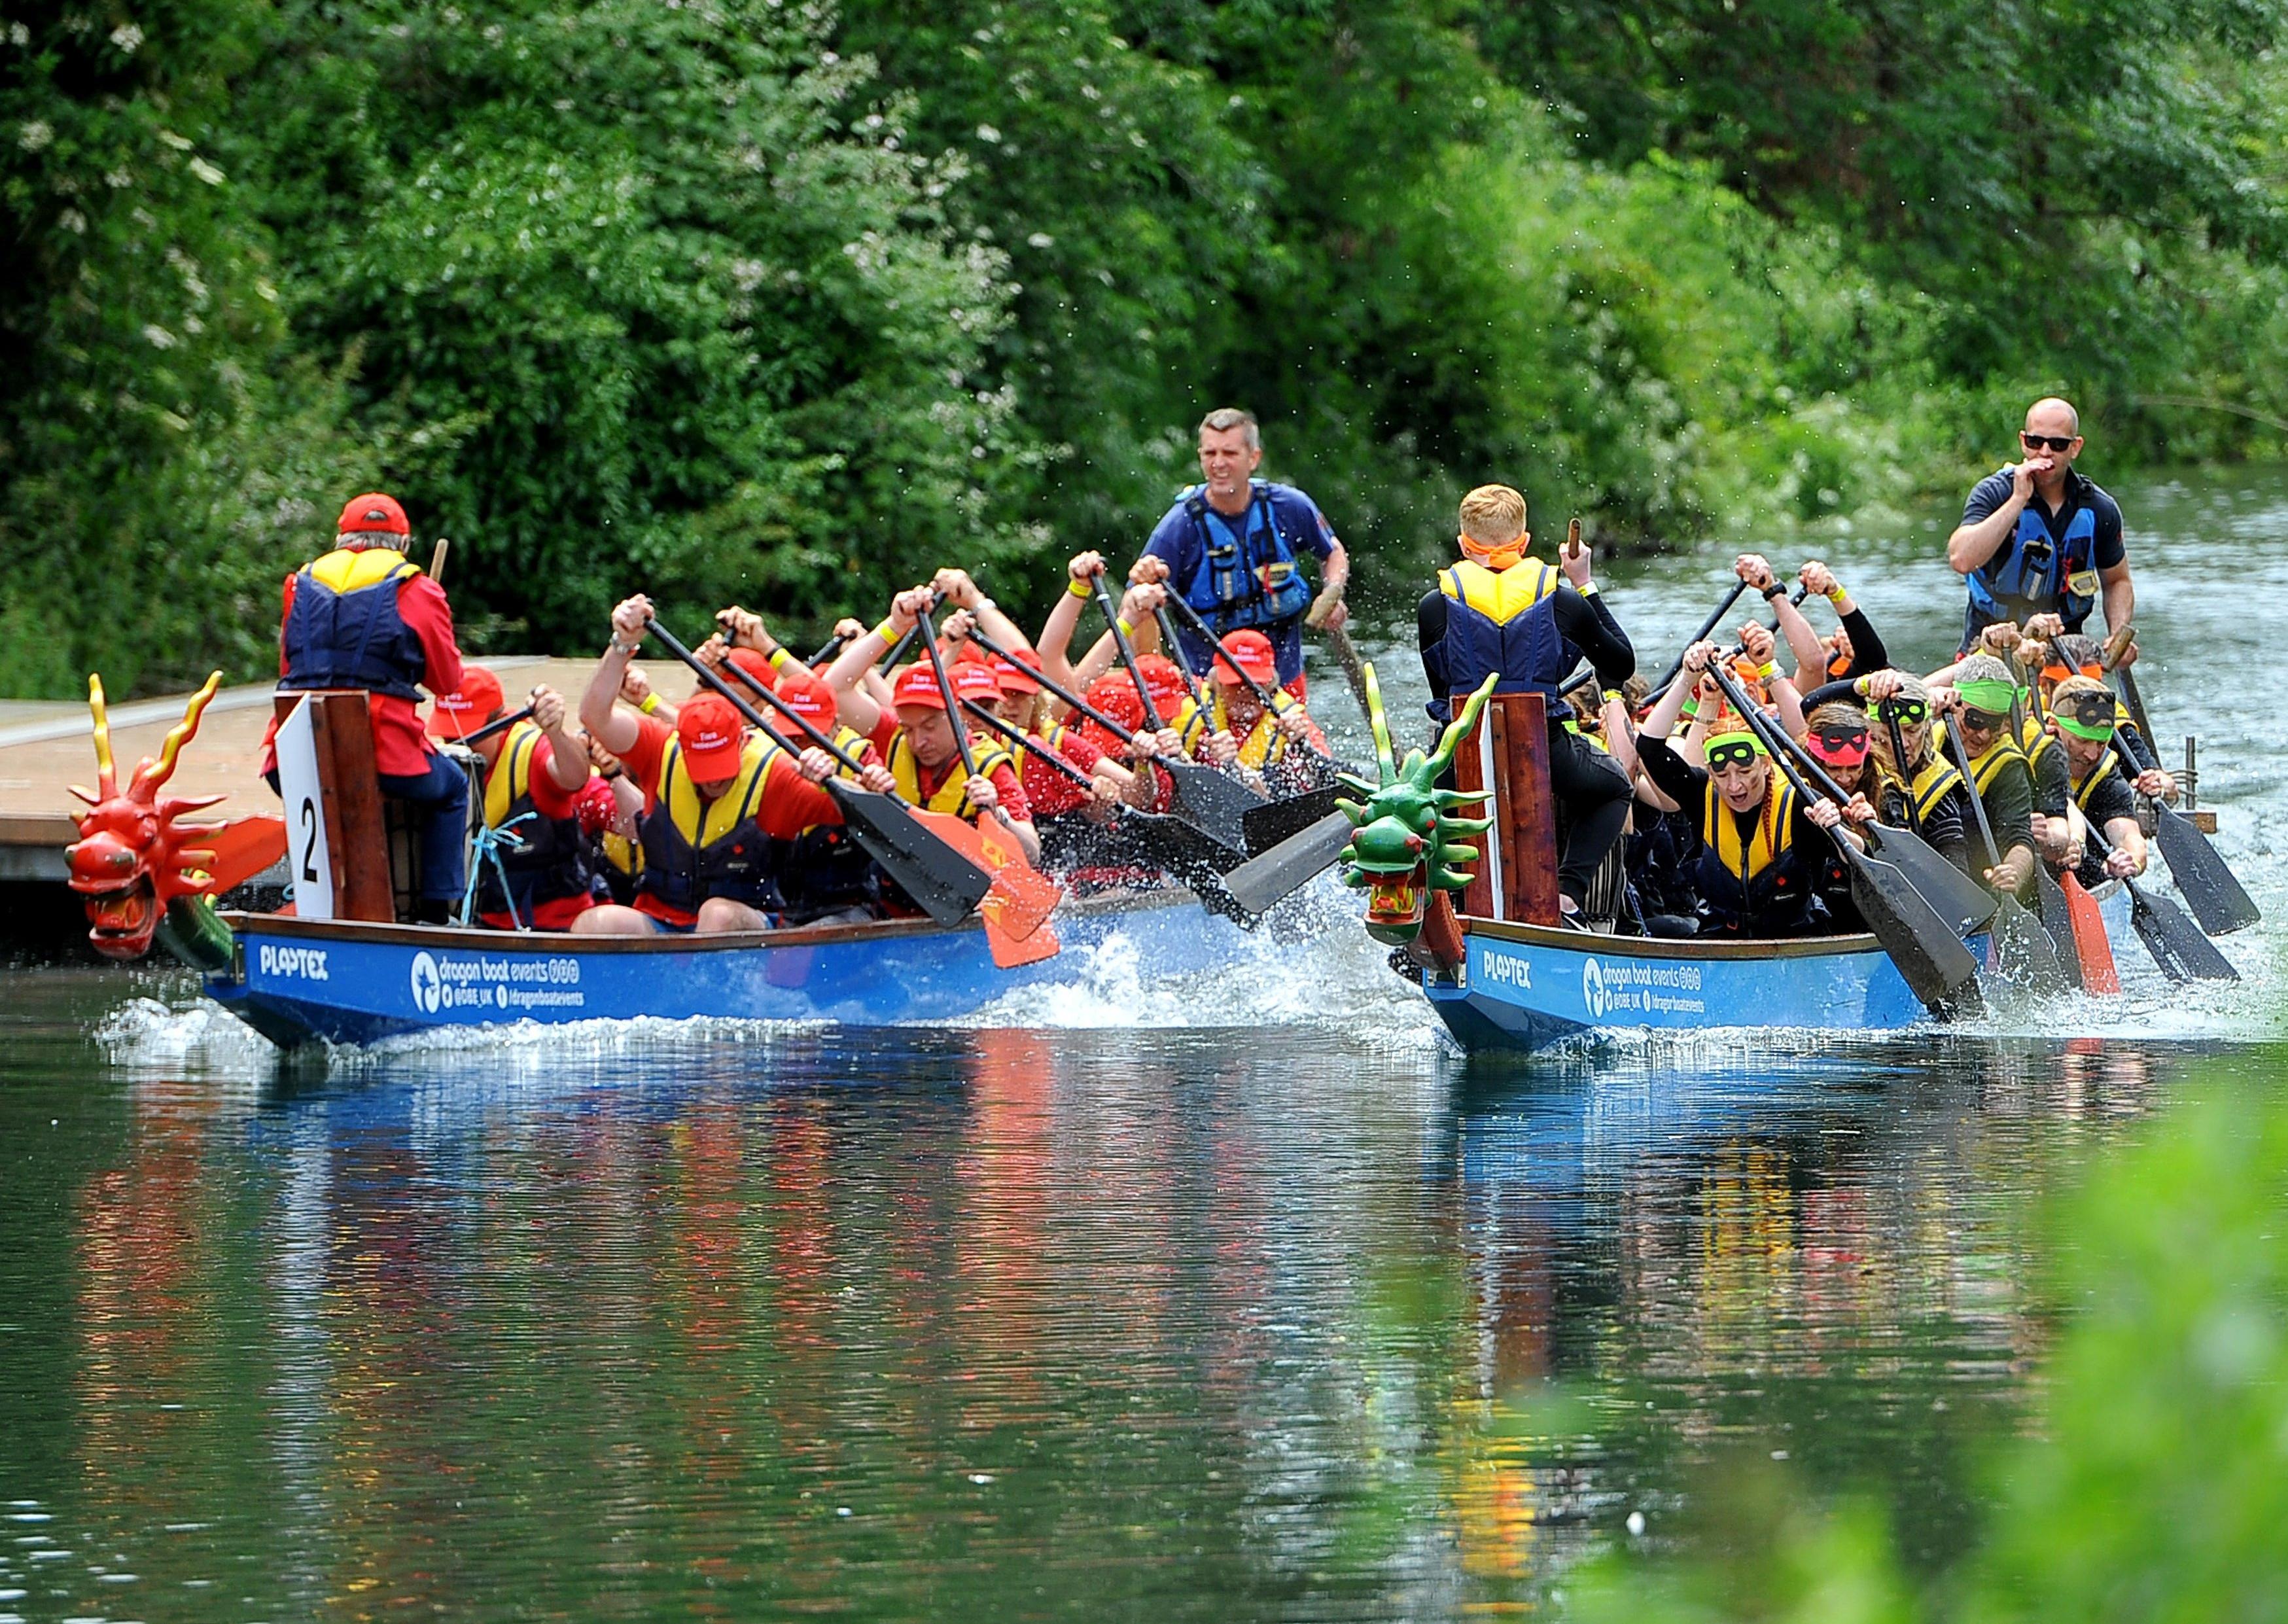 The Chichester Dragon Boat Race takes place on June 14